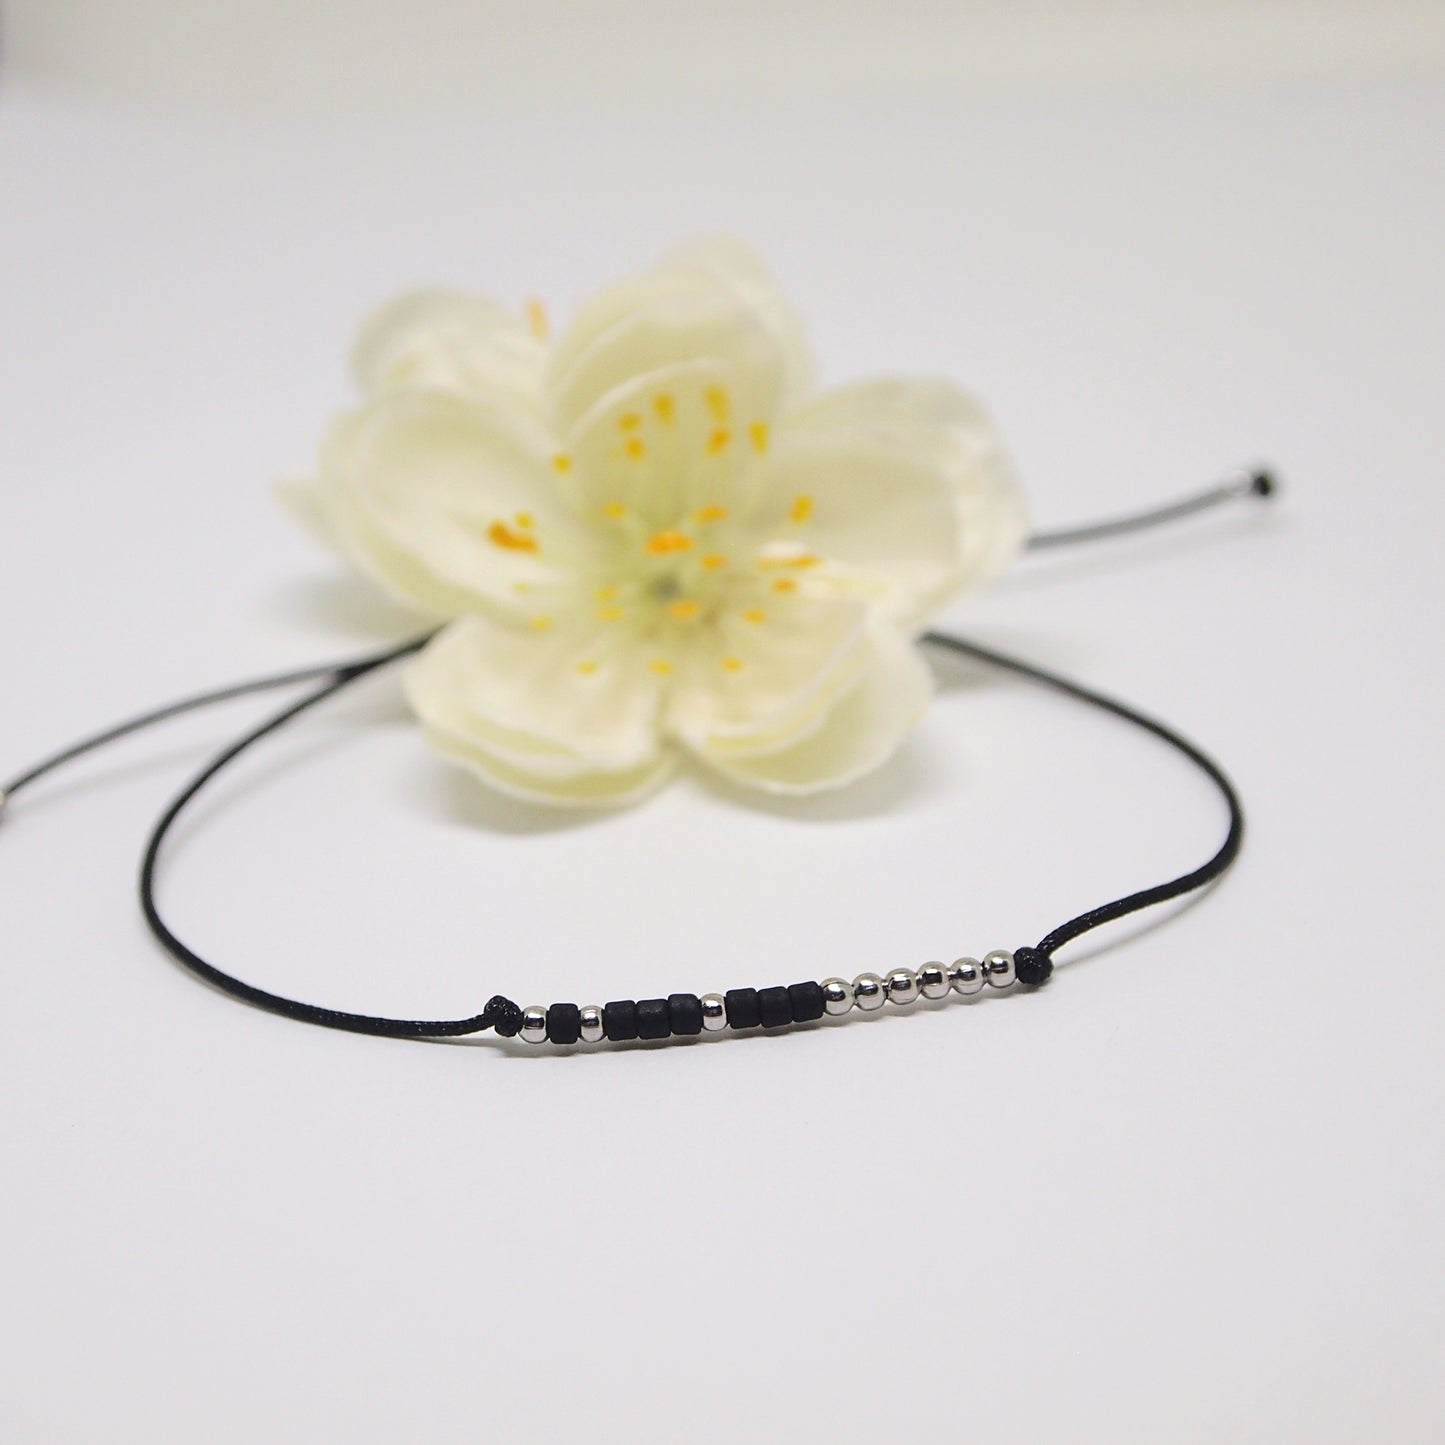 dainty personalized bracelet with morse code, perfect meaningful gift